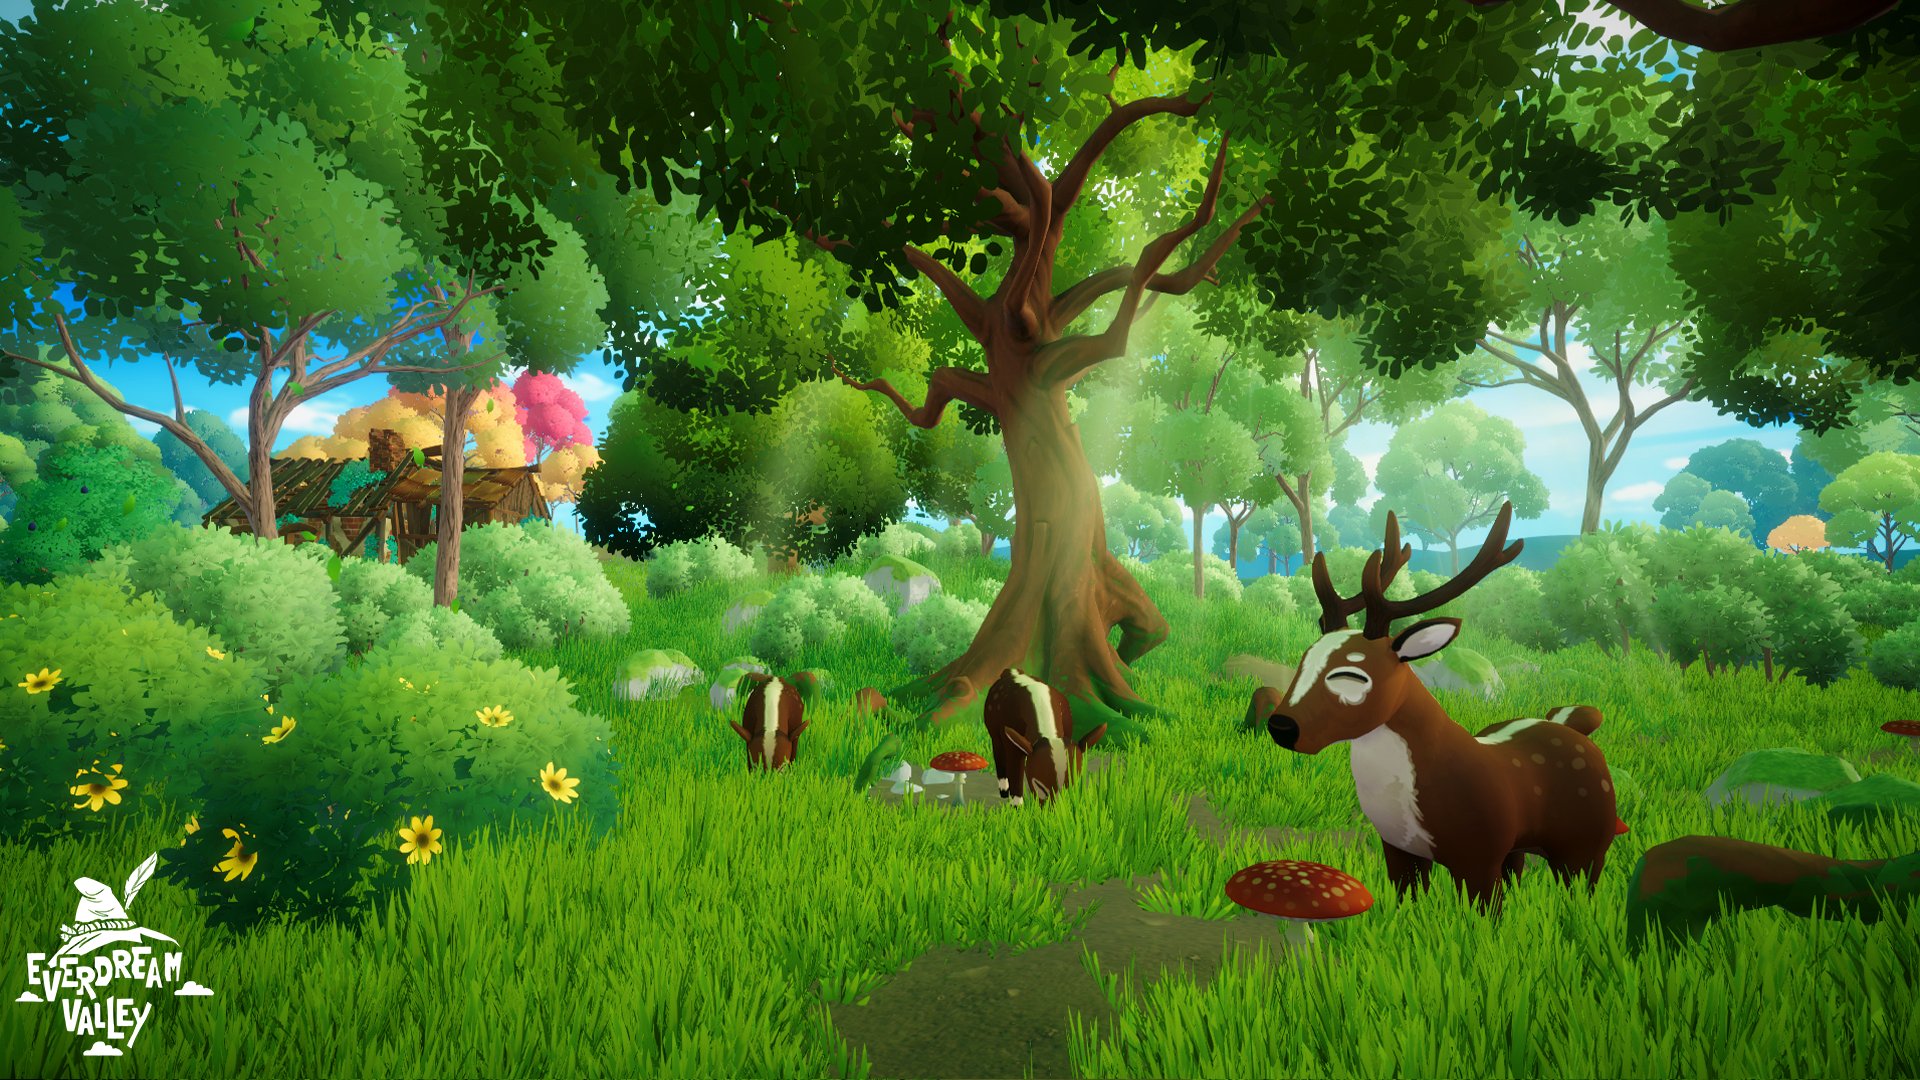 Everdream Valley - DEMO on Steam! PC/Consoles SOON on Twitter: 